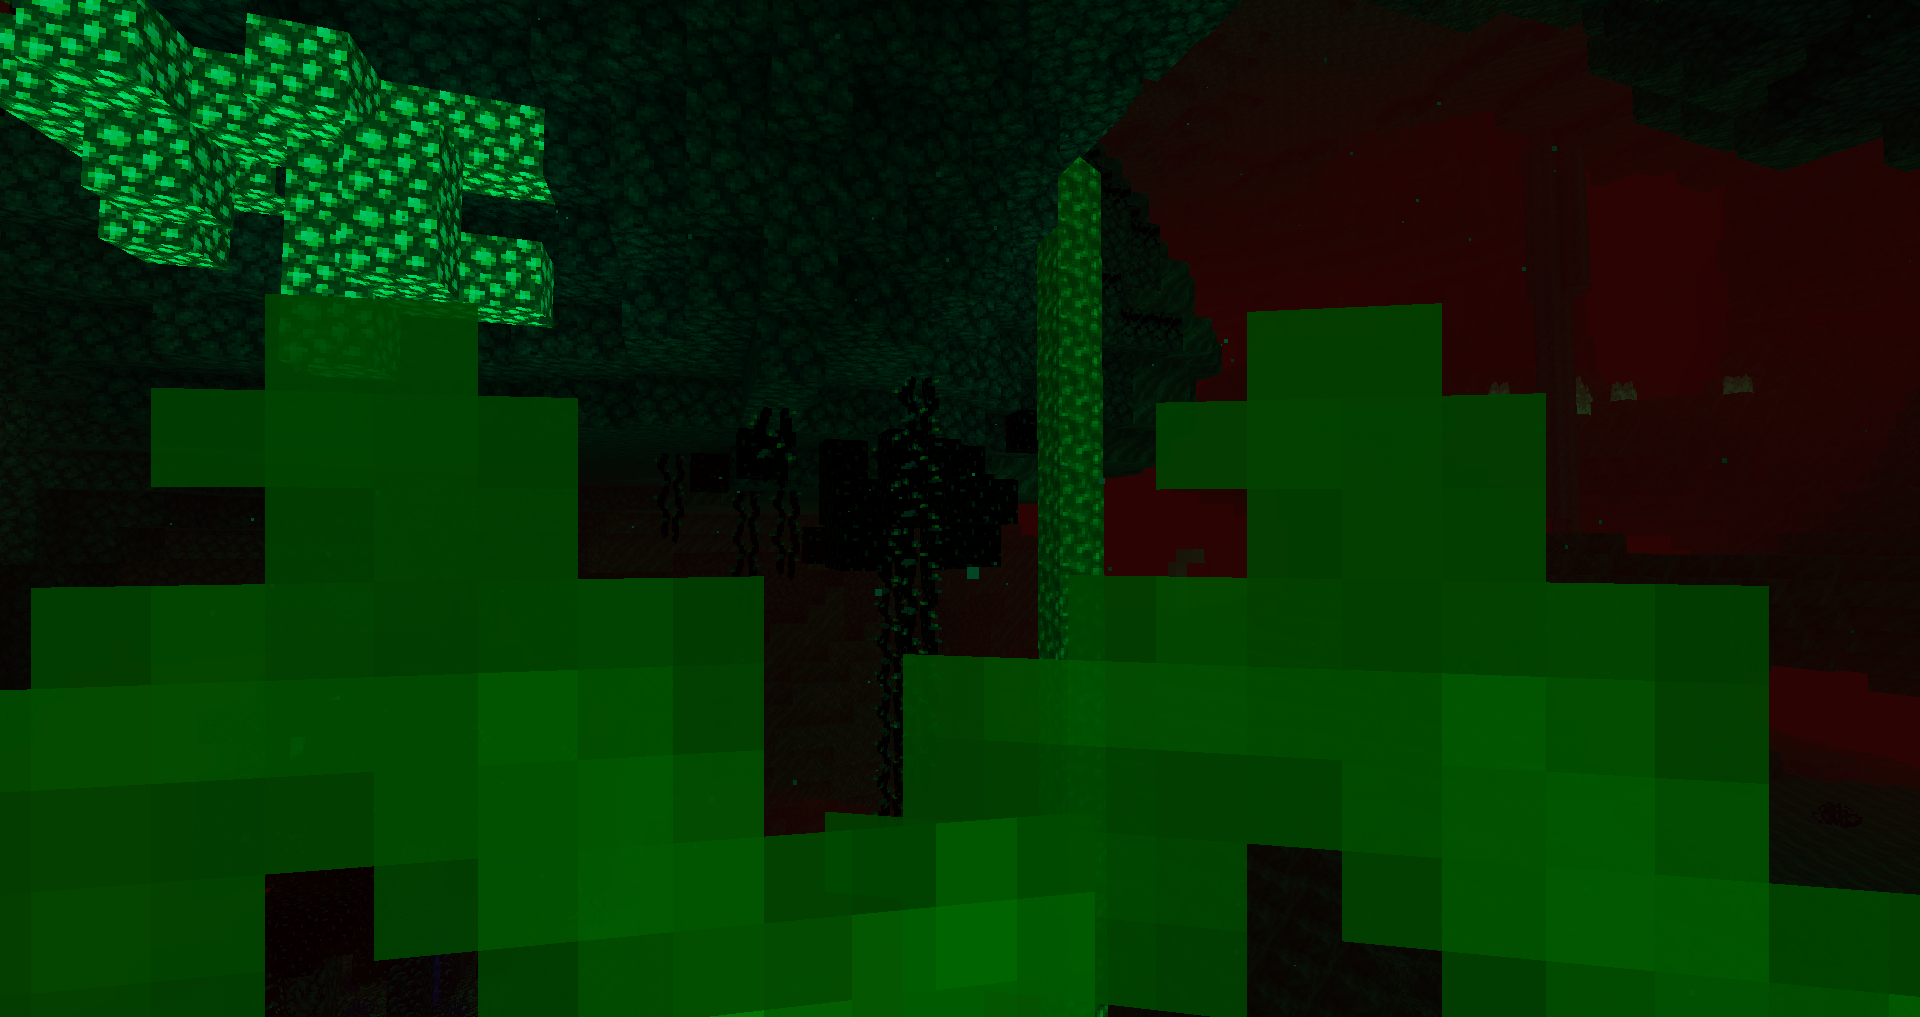 The player is on fire, and the Nether Fog is shifting through hues of the rainbow